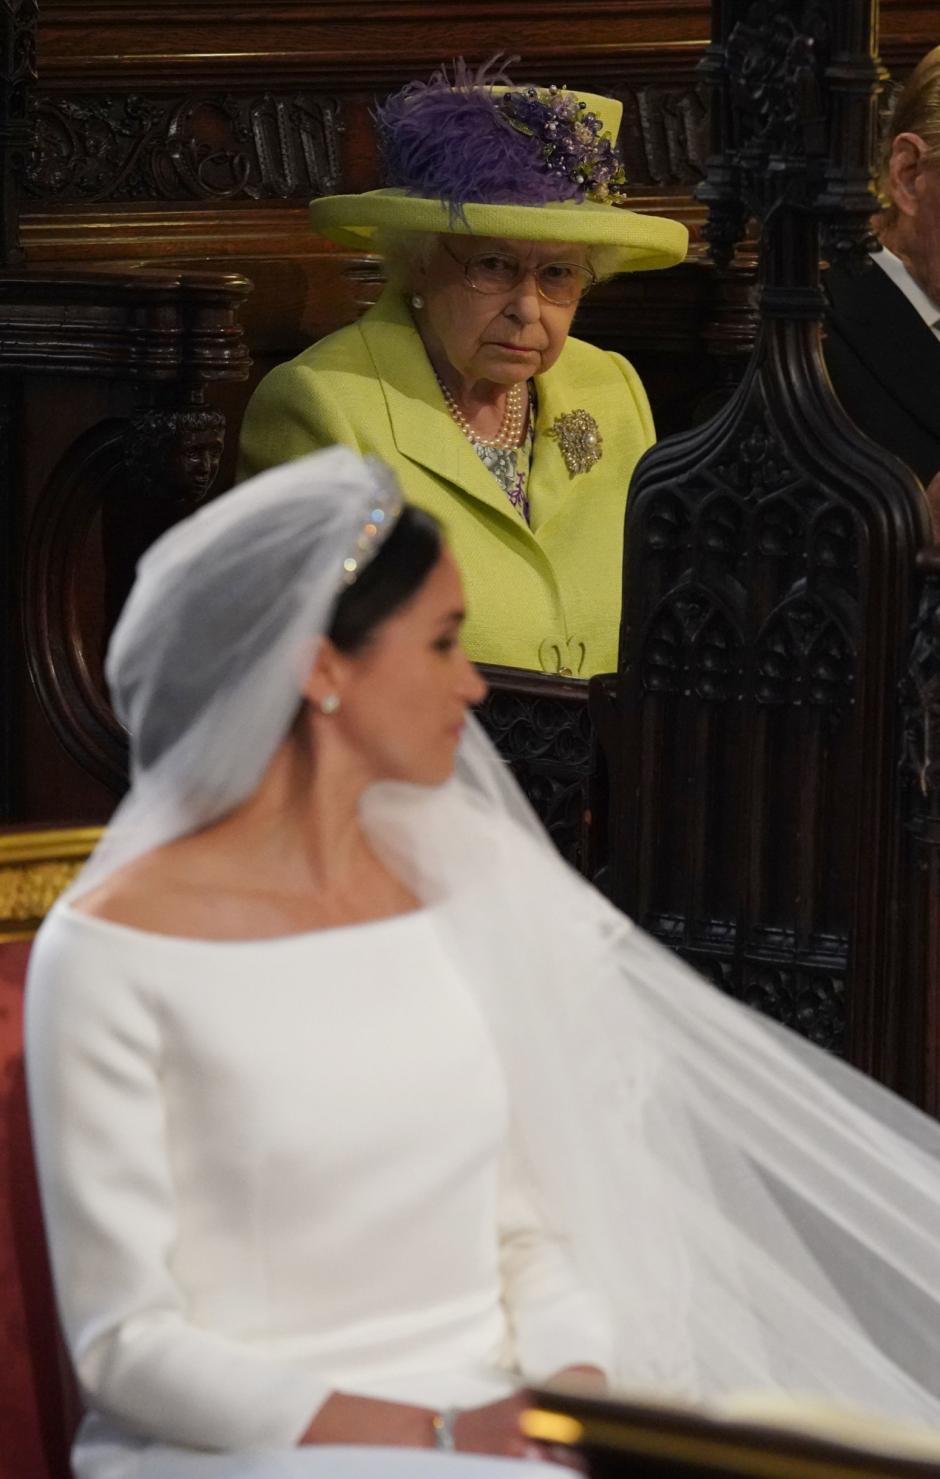 Queen Elizabeth II during the wedding of Prince Harry and Meghan Markle in St George's Chapel at Windsor Castle. *** Local Caption *** .